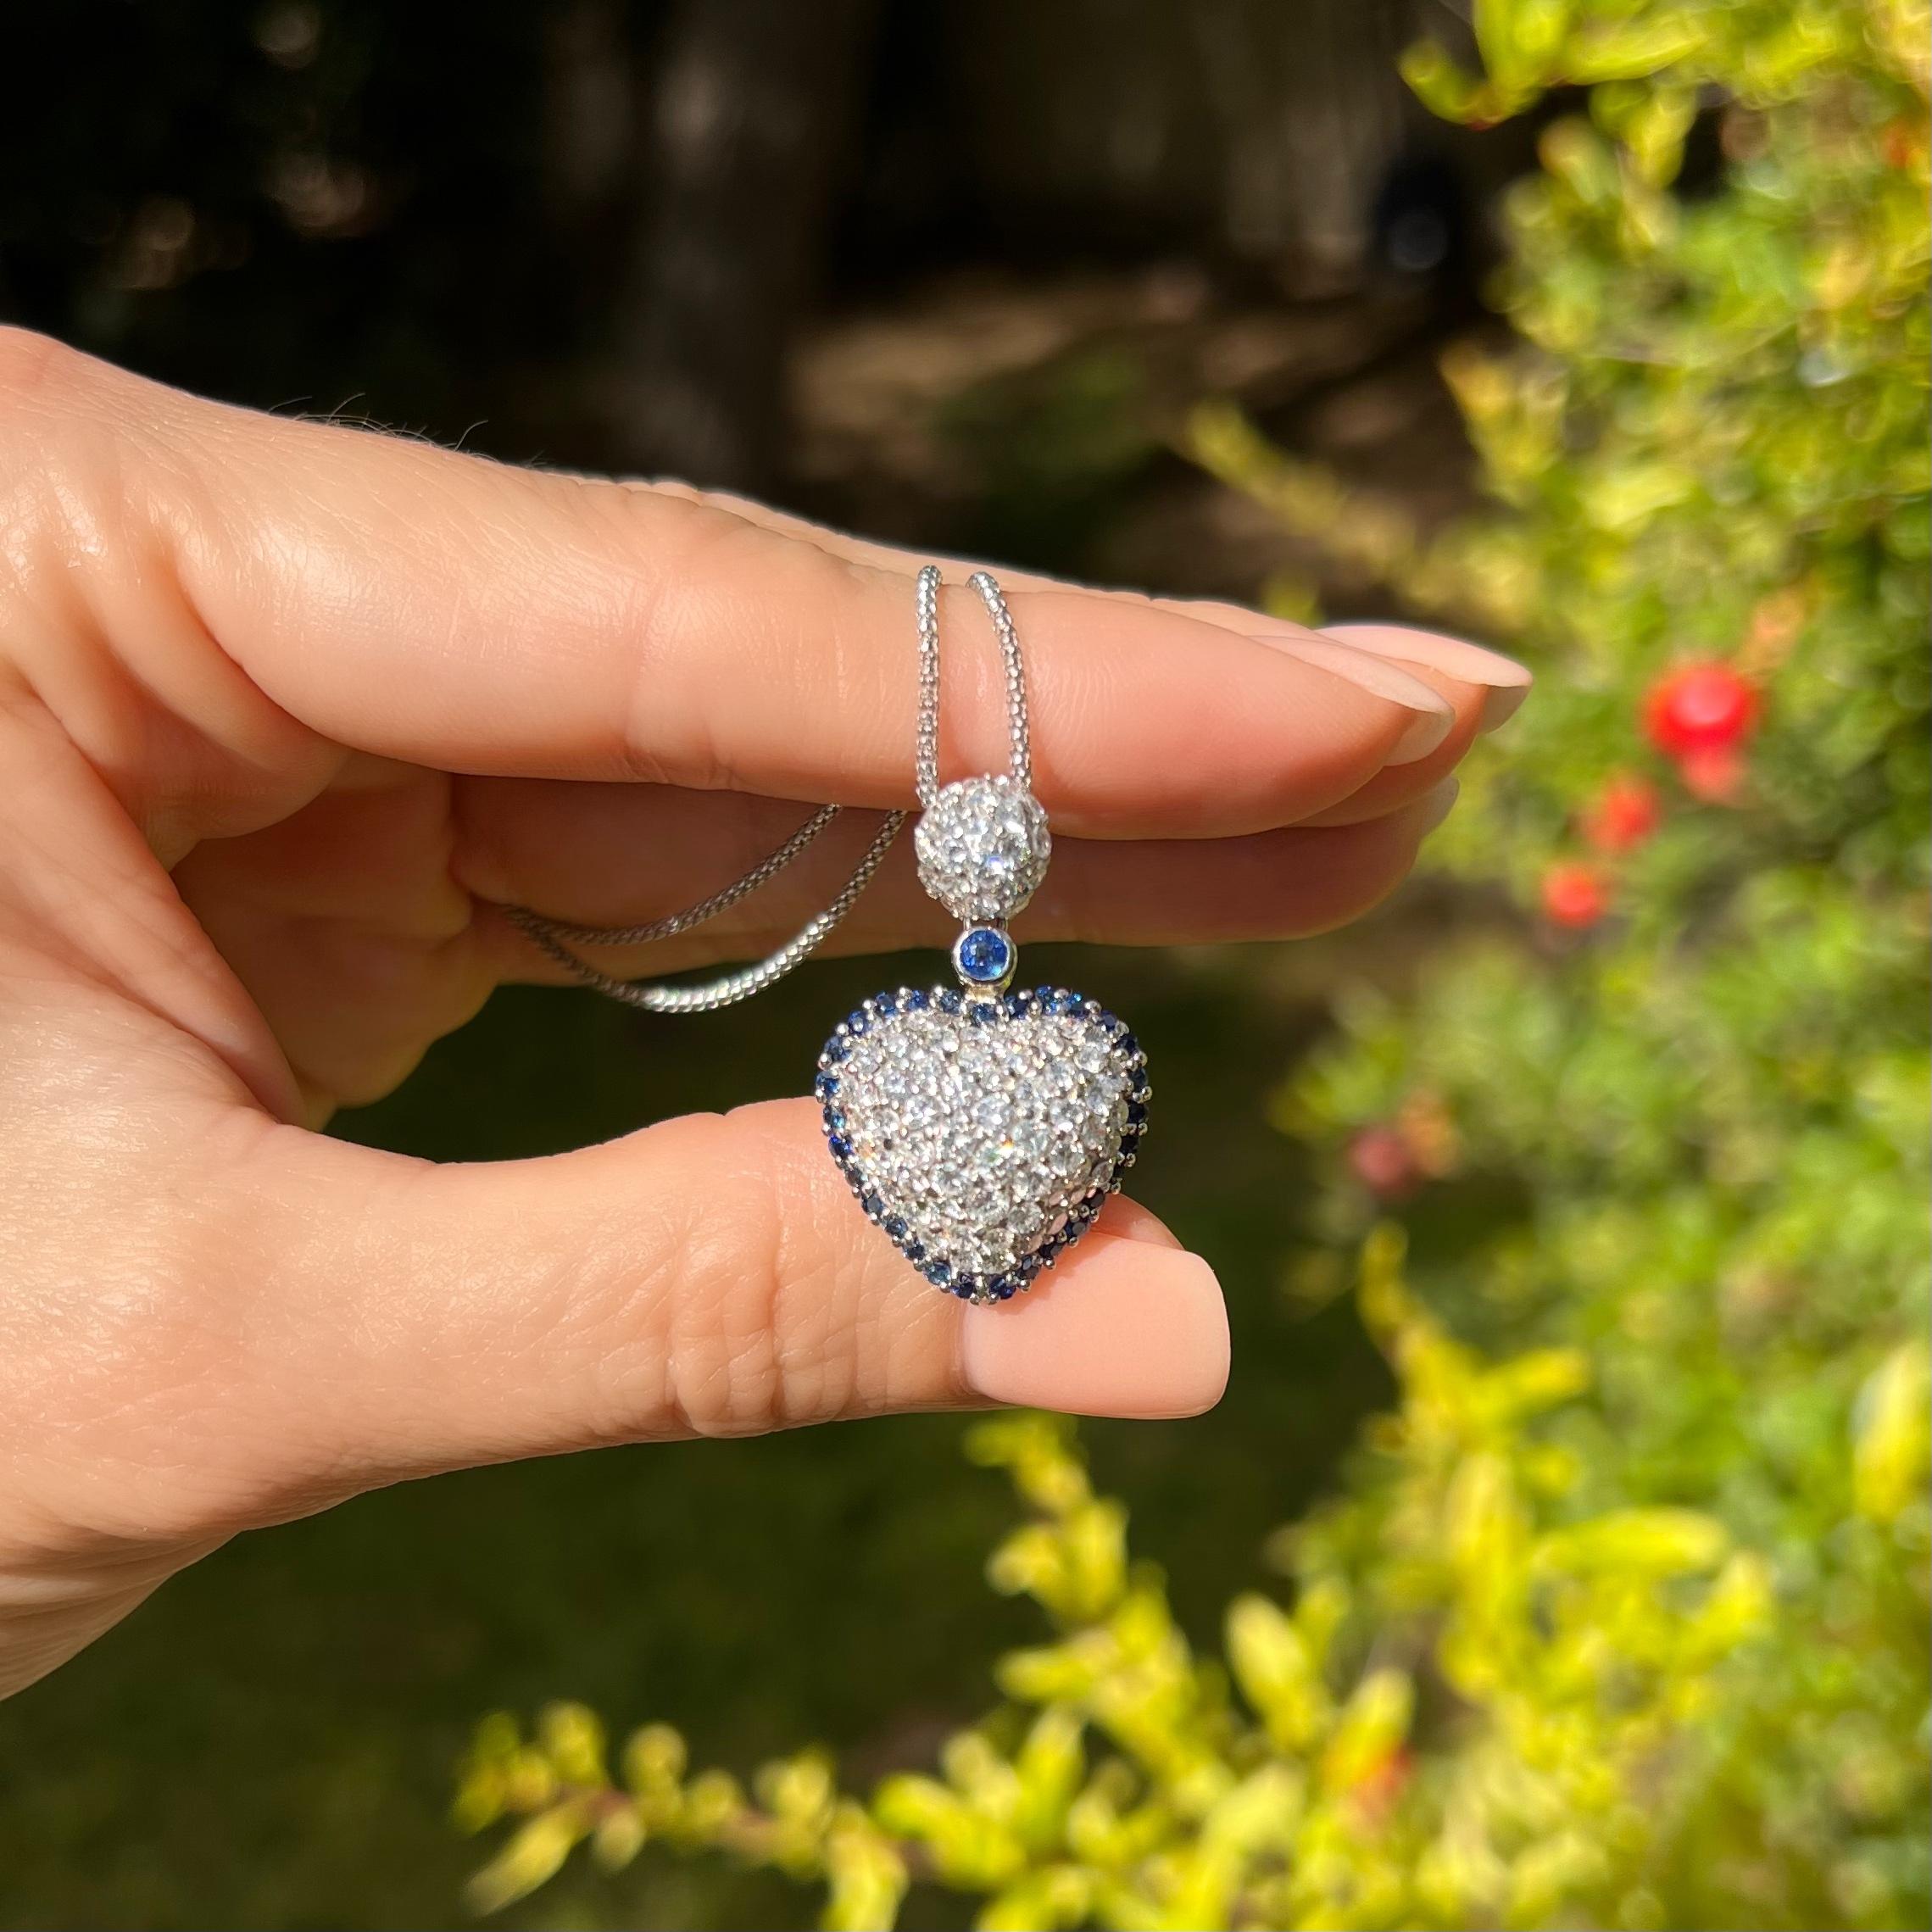 Modern Pave Diamond and Sapphire Halo Heart Pendant Necklace Estate Fine Jewelry For Sale